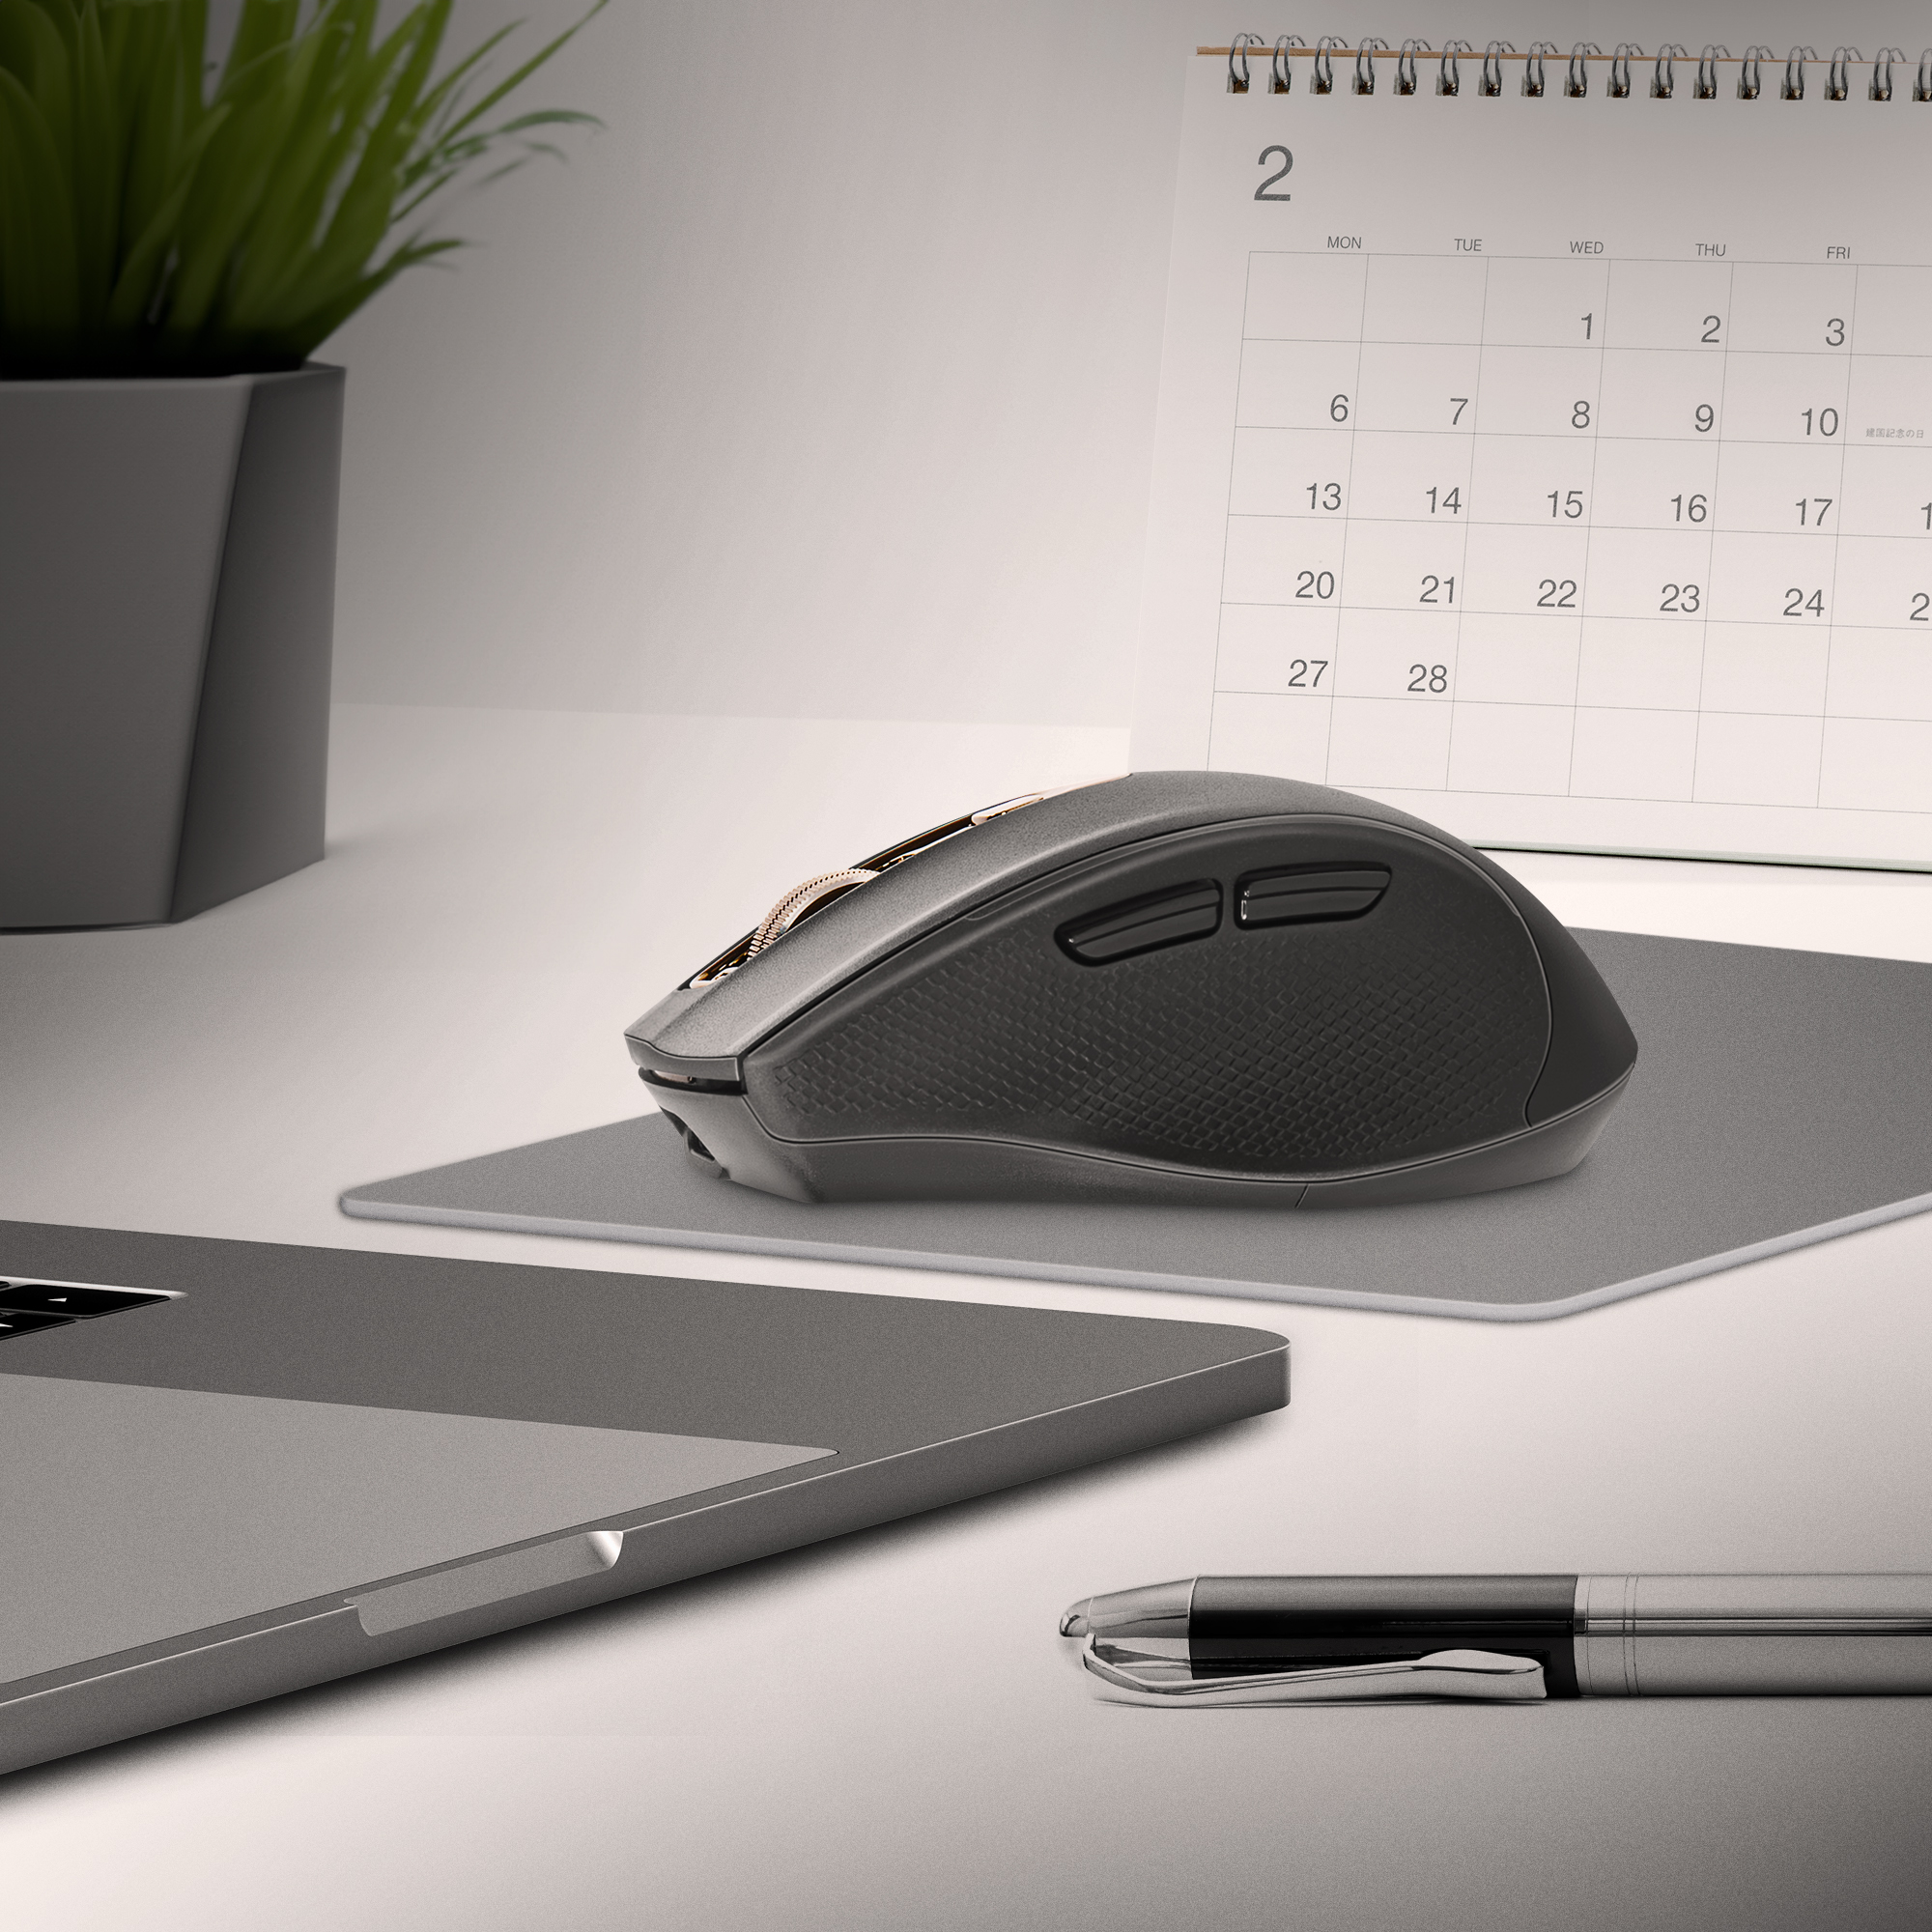 Professional mouse to enhance work efficiency